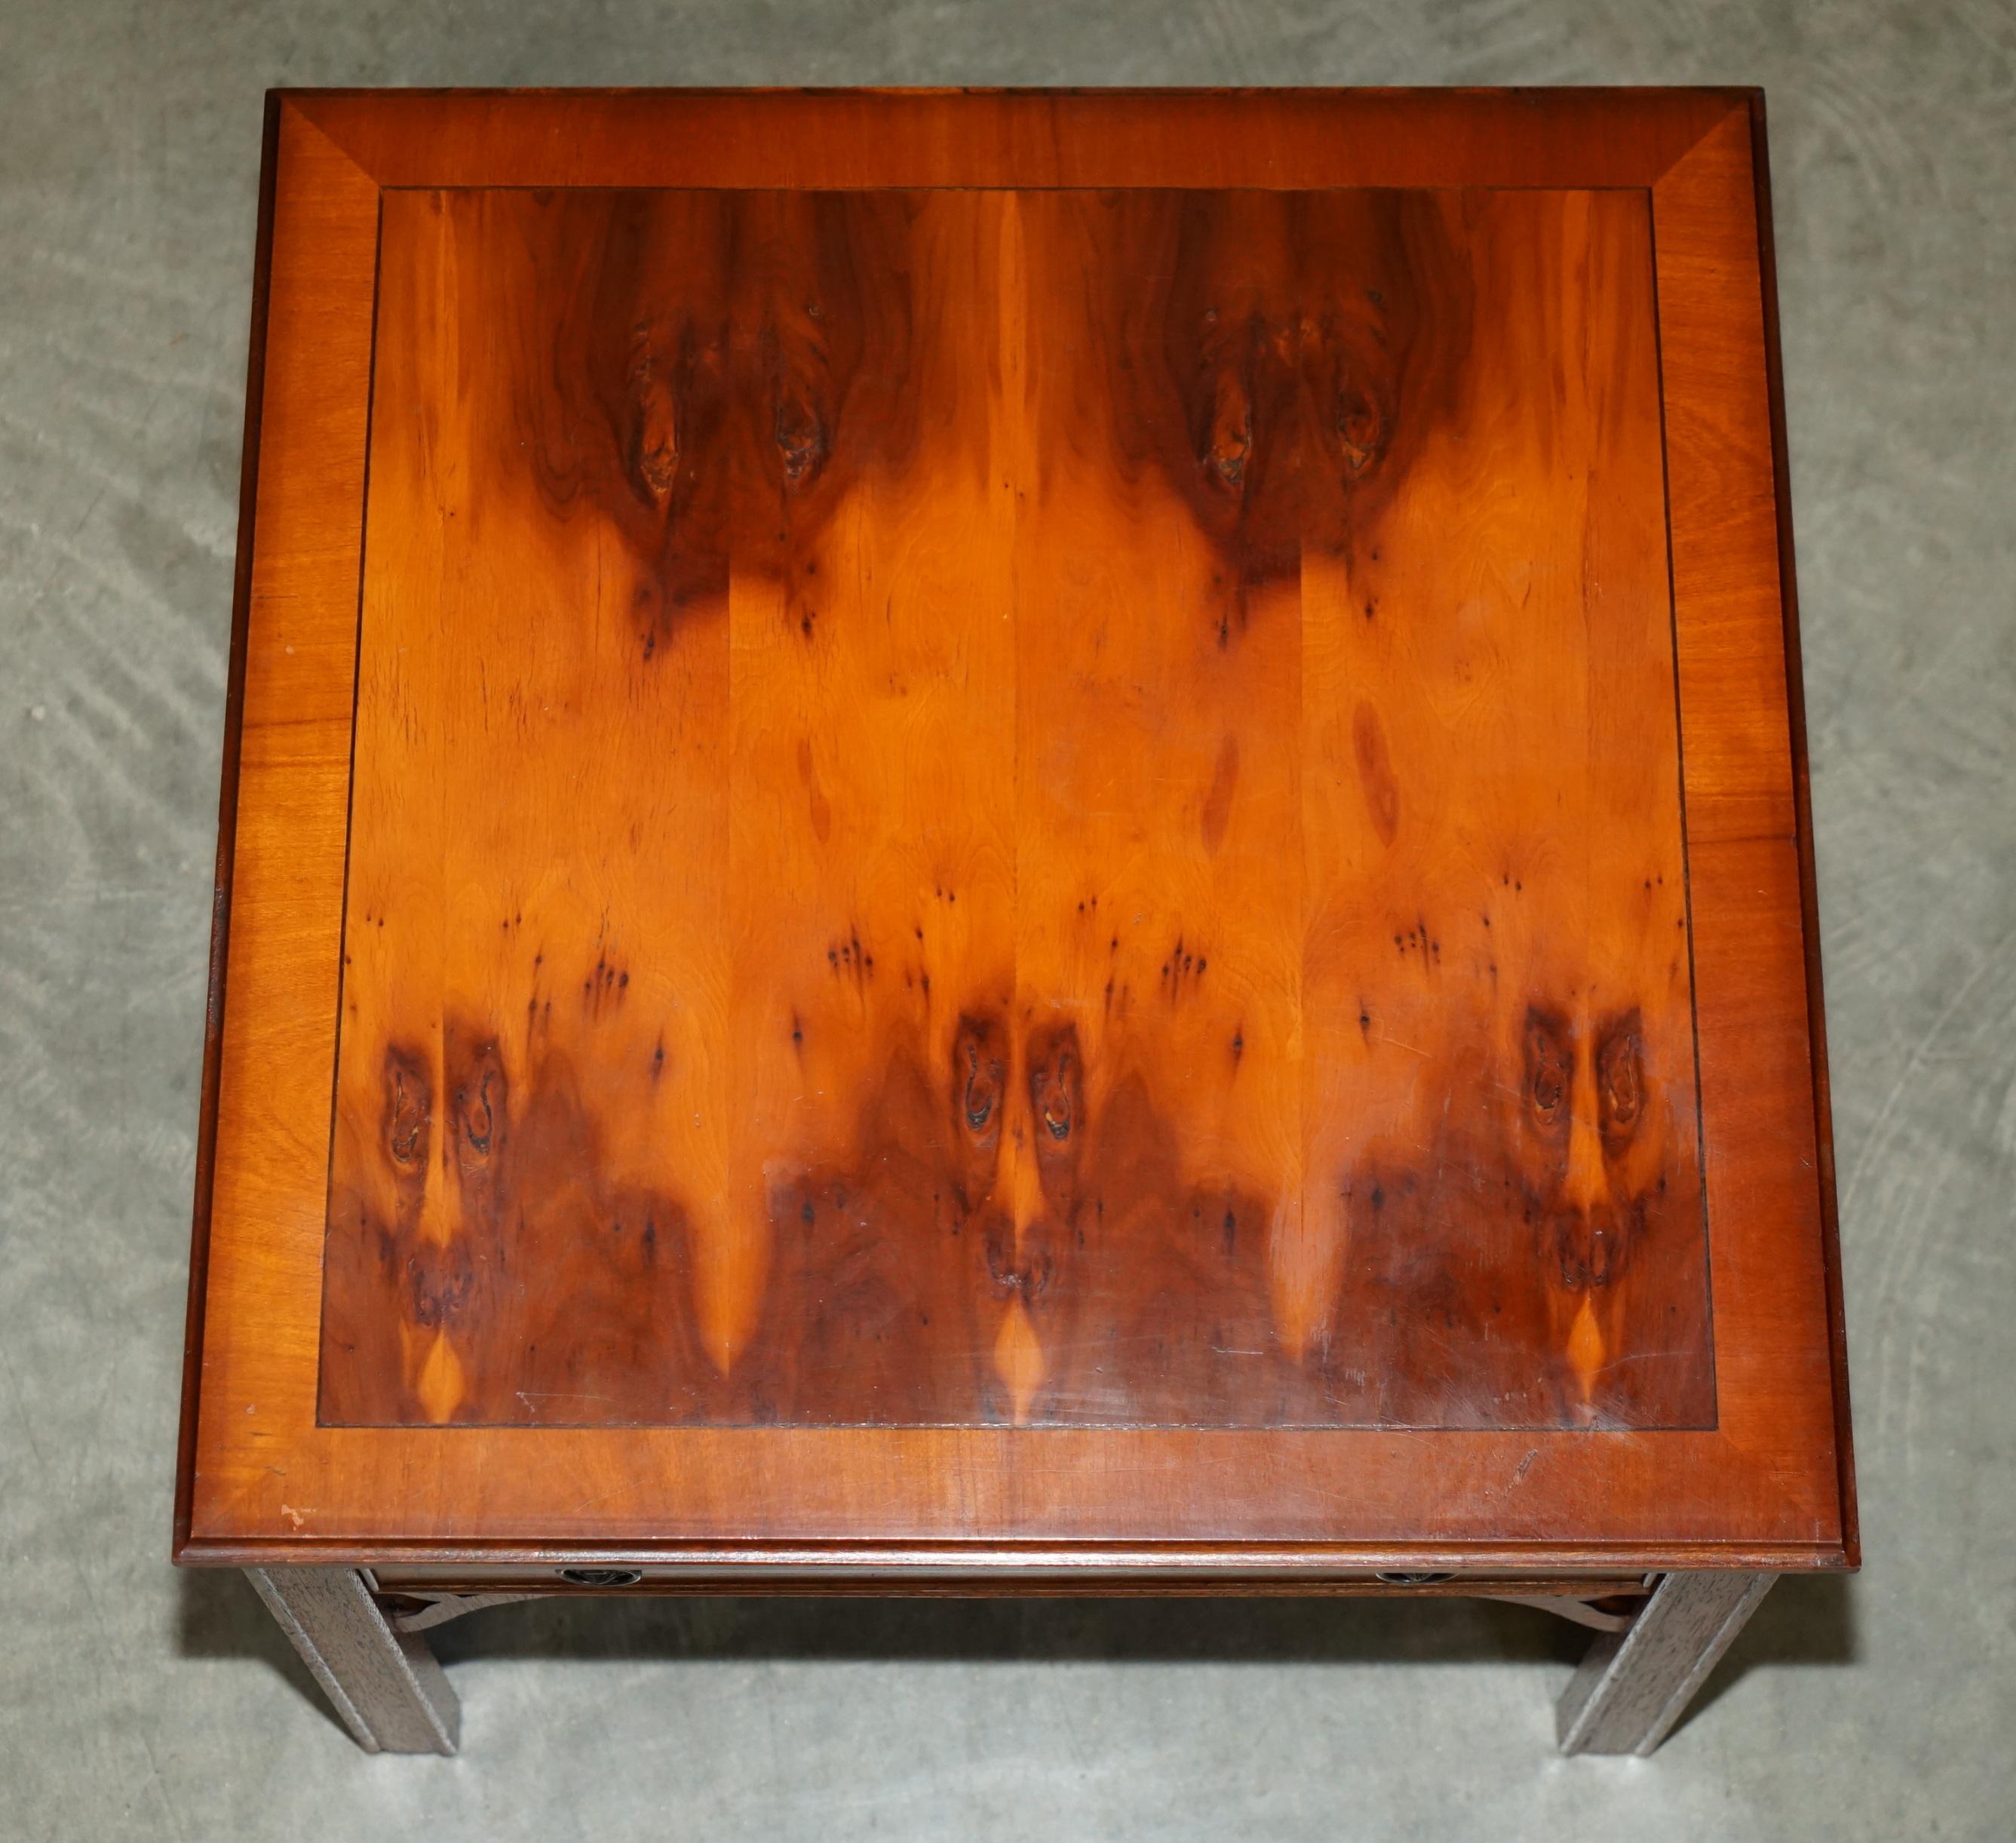 LOVELY PAIR OF BURR YEW WOOD SiDE END LAMP WINE TABLES MIT LARGE SINGLE DRAWERS (Eibenholz) im Angebot